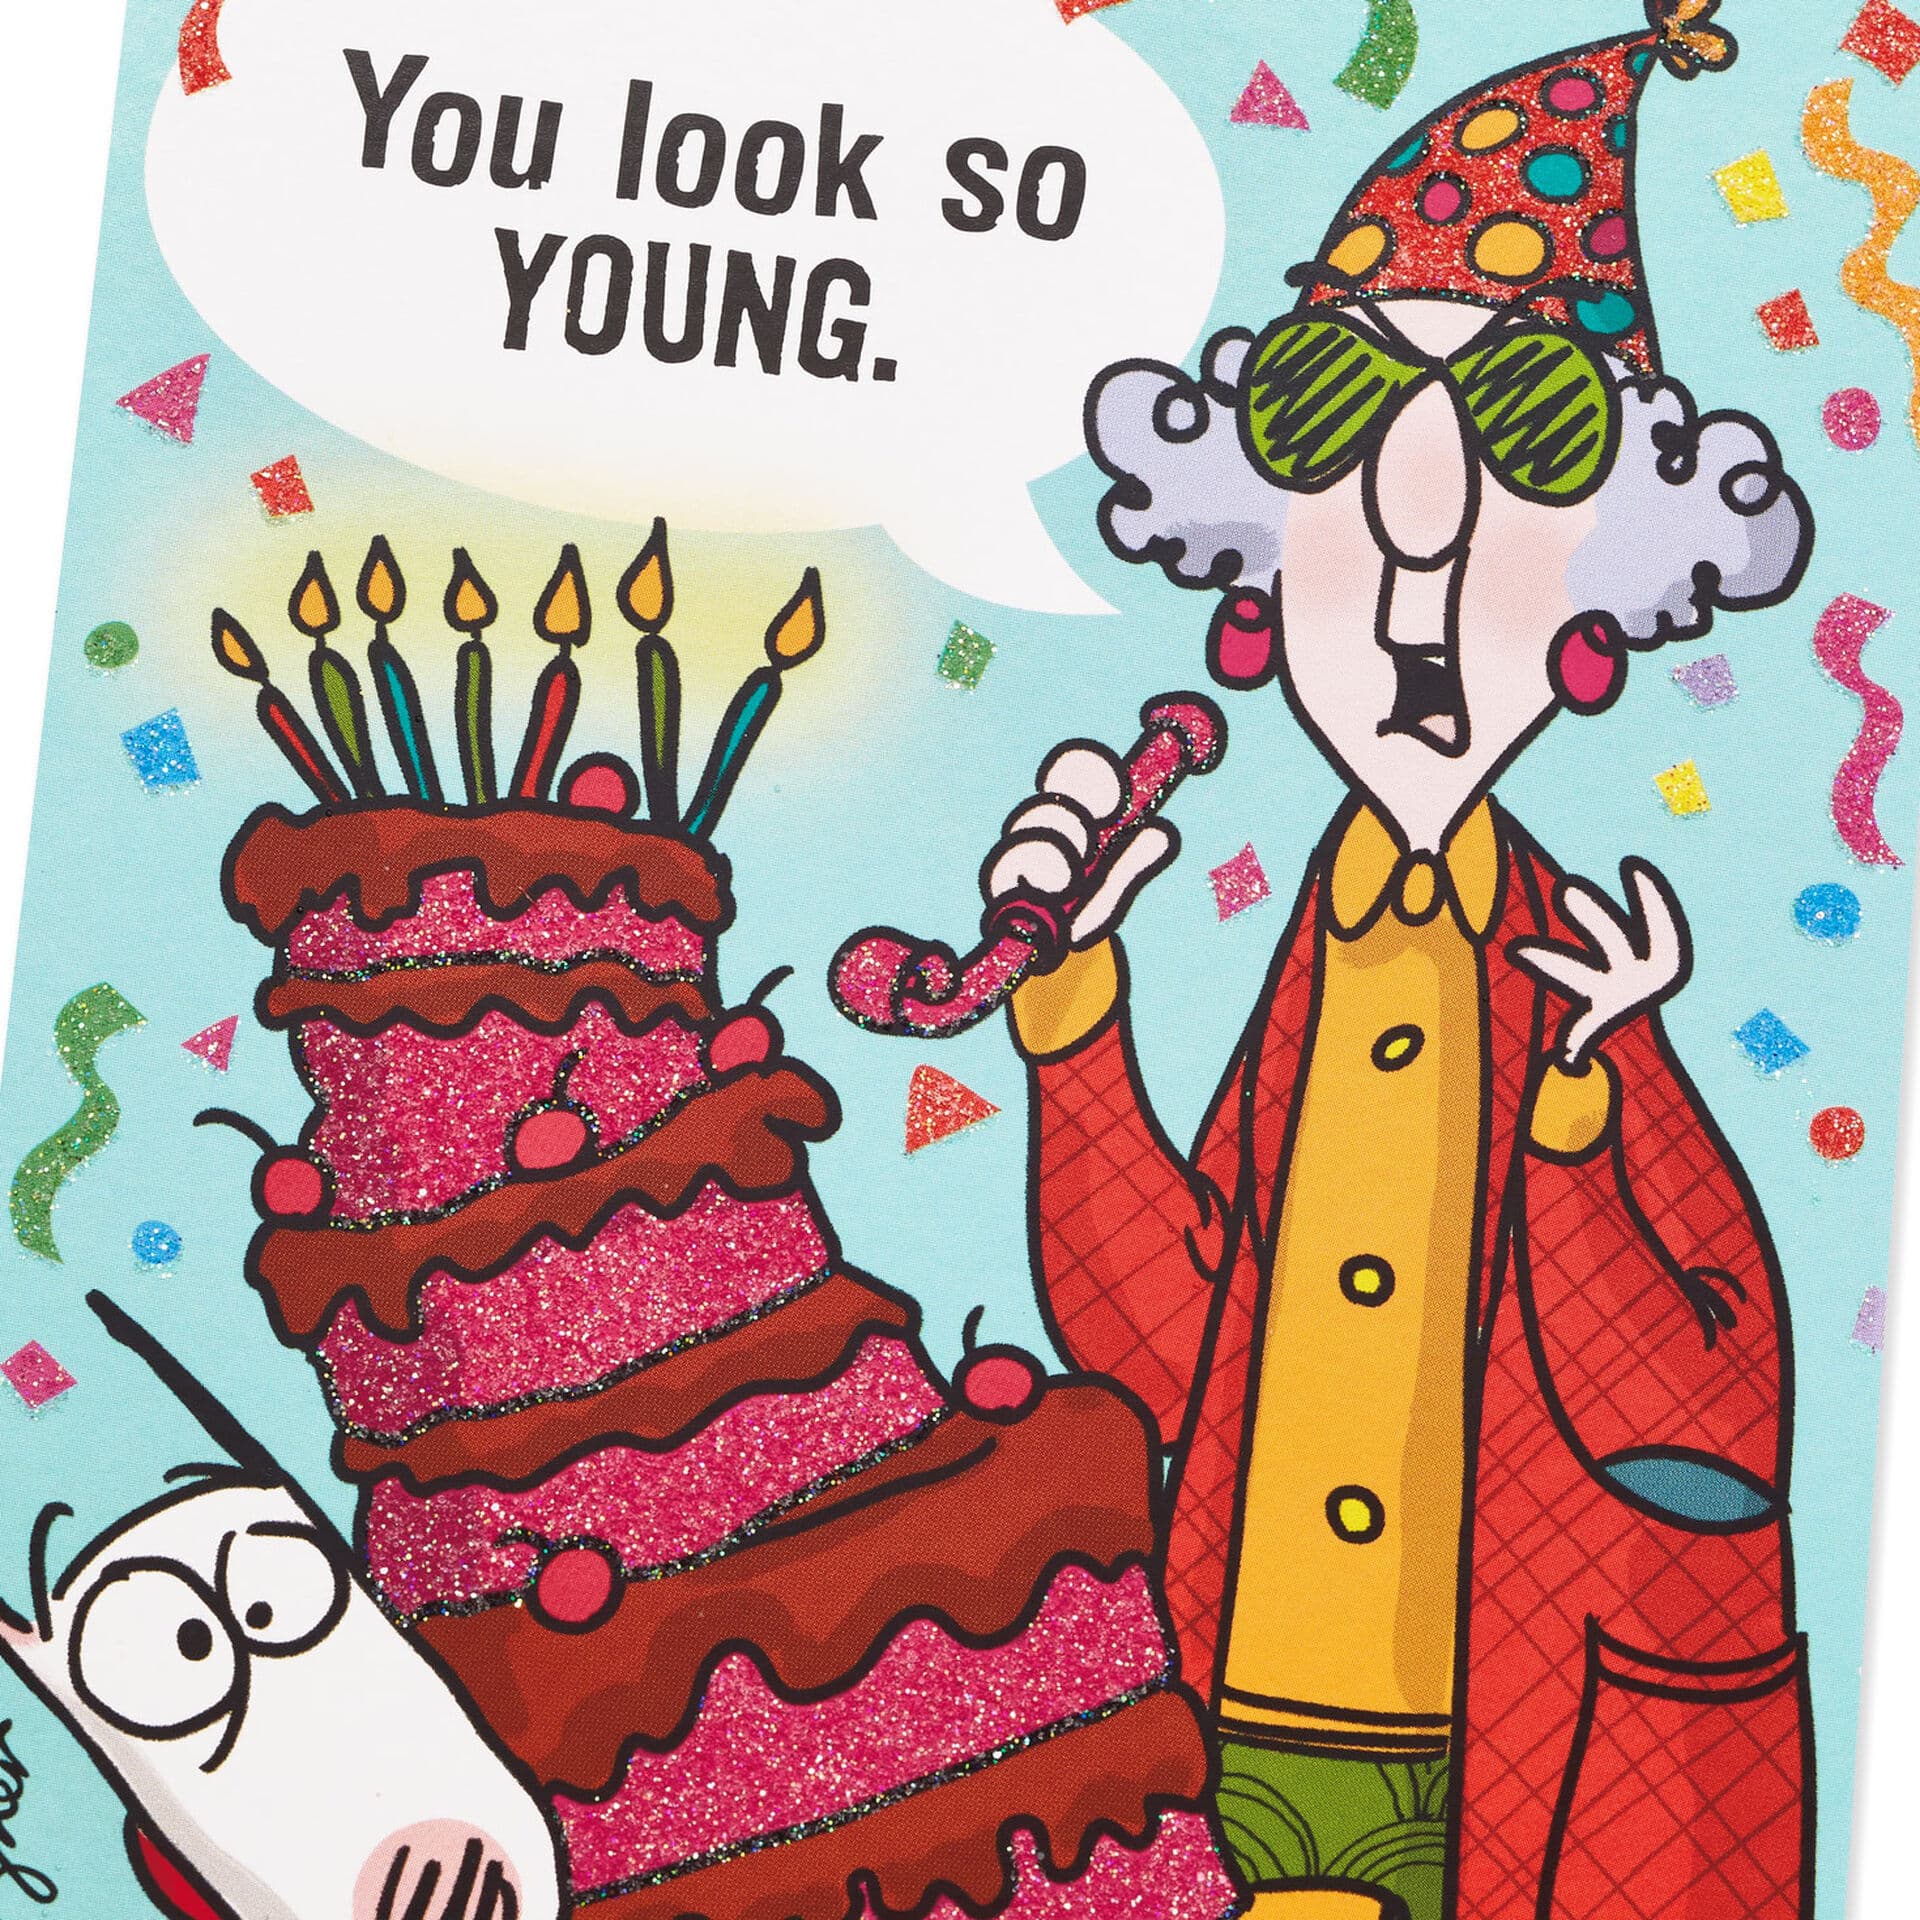 So Young Funny Birthday Card